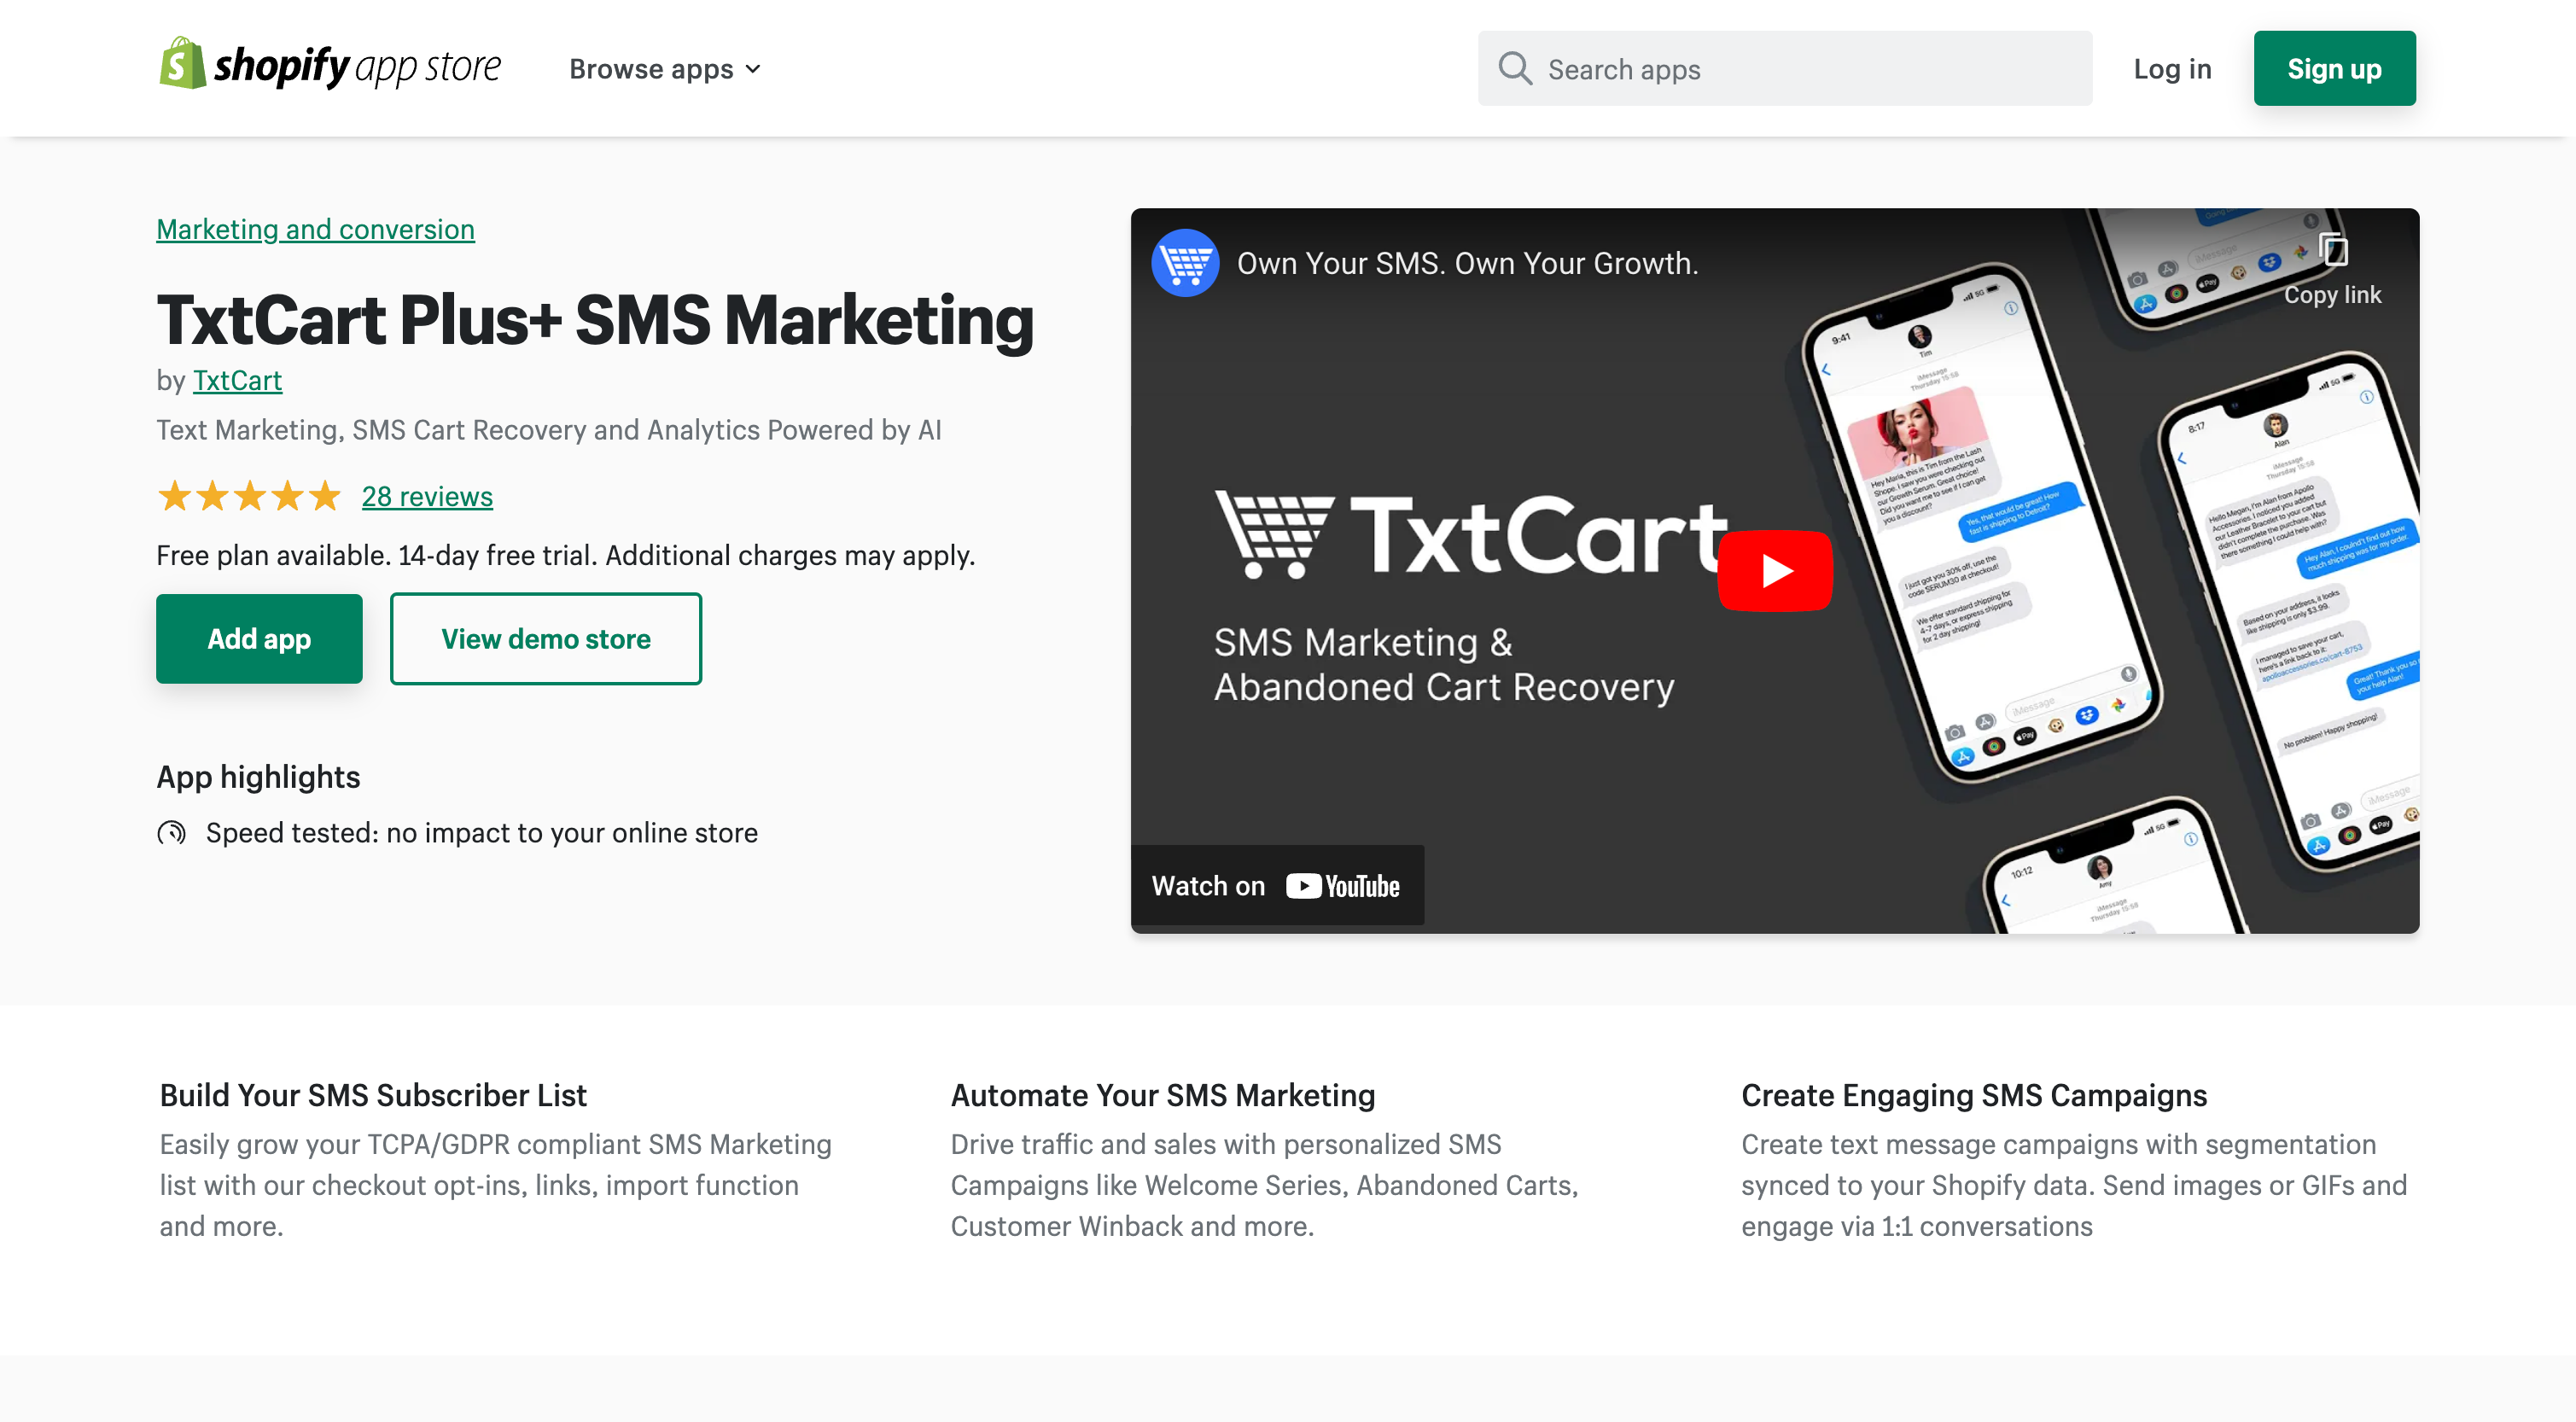 TxtCart Plus+ SMS Marketing - Text Marketing, SMS Cart Recovery and Analytics Powered by AI